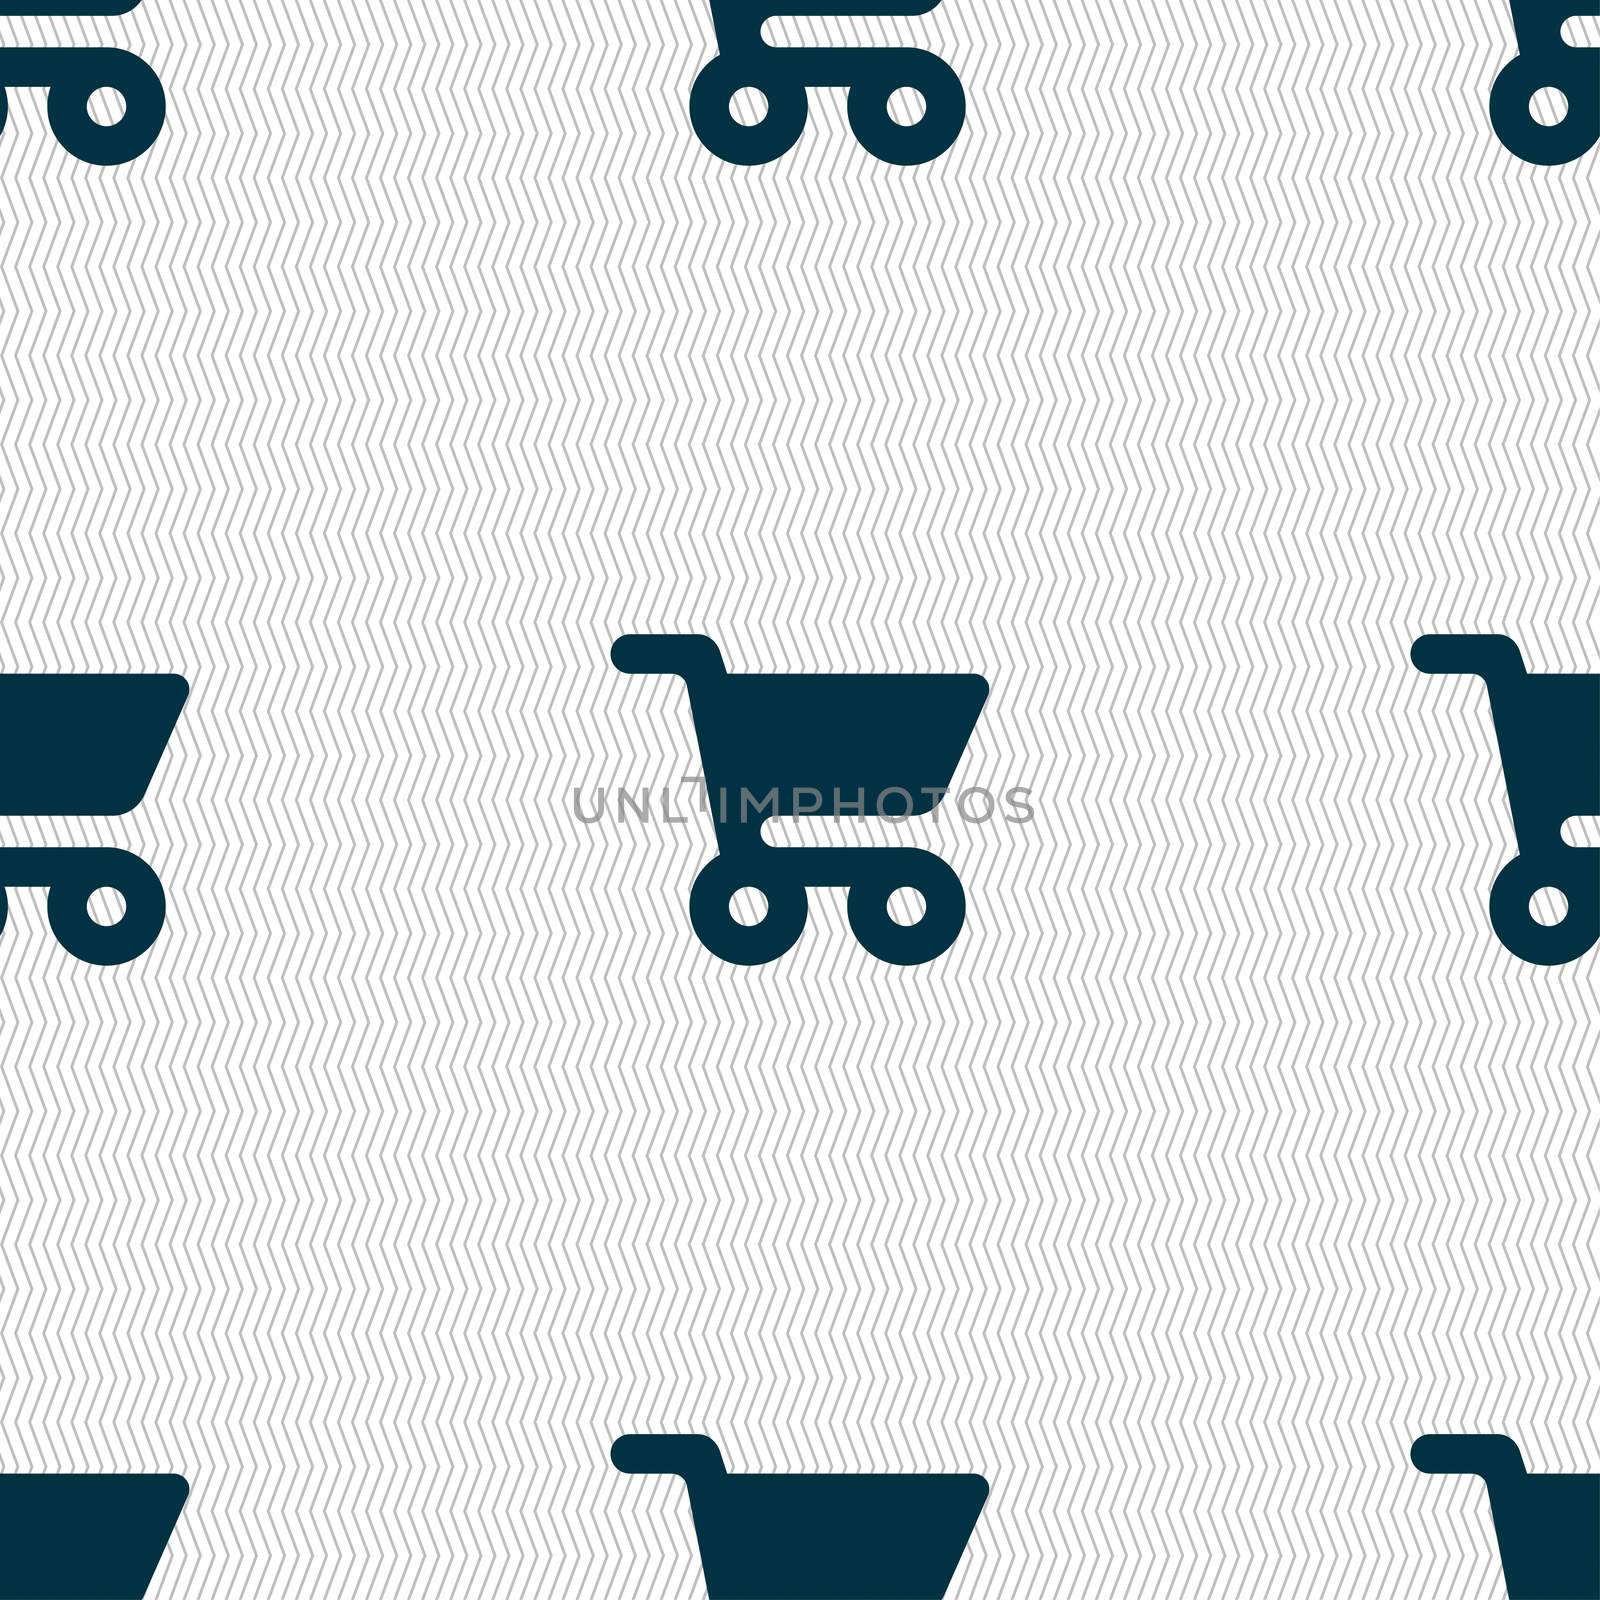 shopping basket icon sign. Seamless pattern with geometric texture. illustration